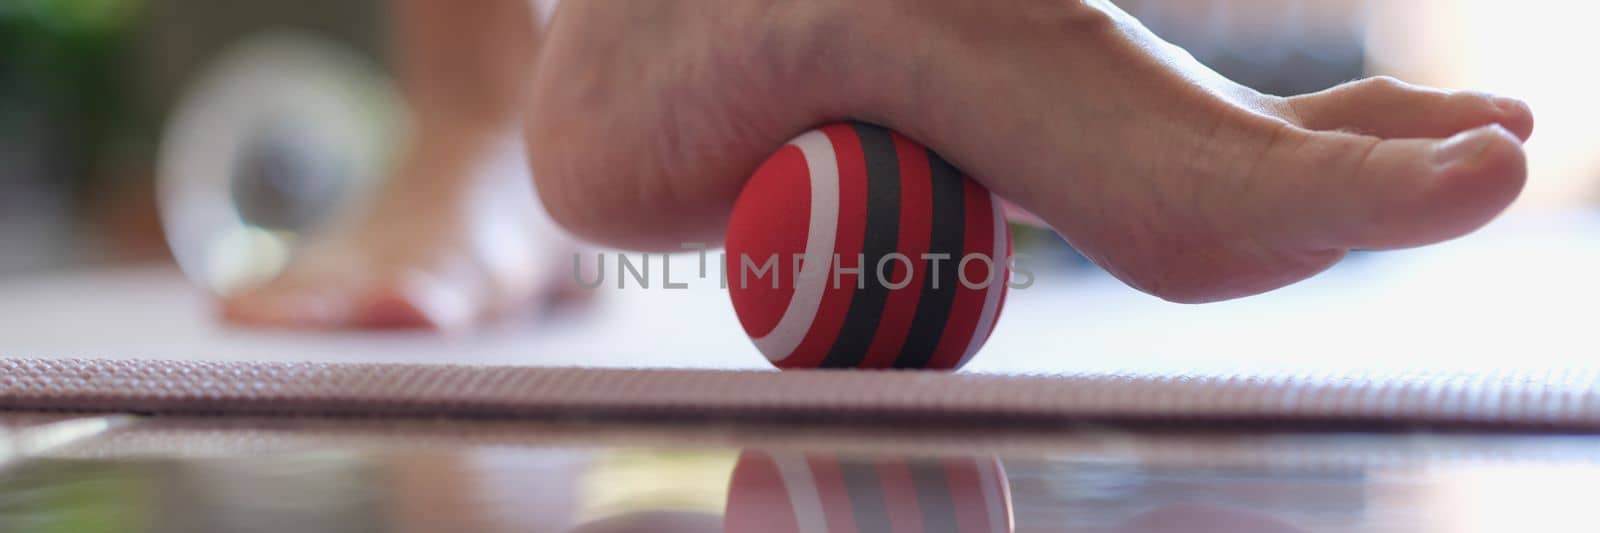 Female heel massage with massage tool for myofascial therapy closeup. Ball for myofascial massage concept